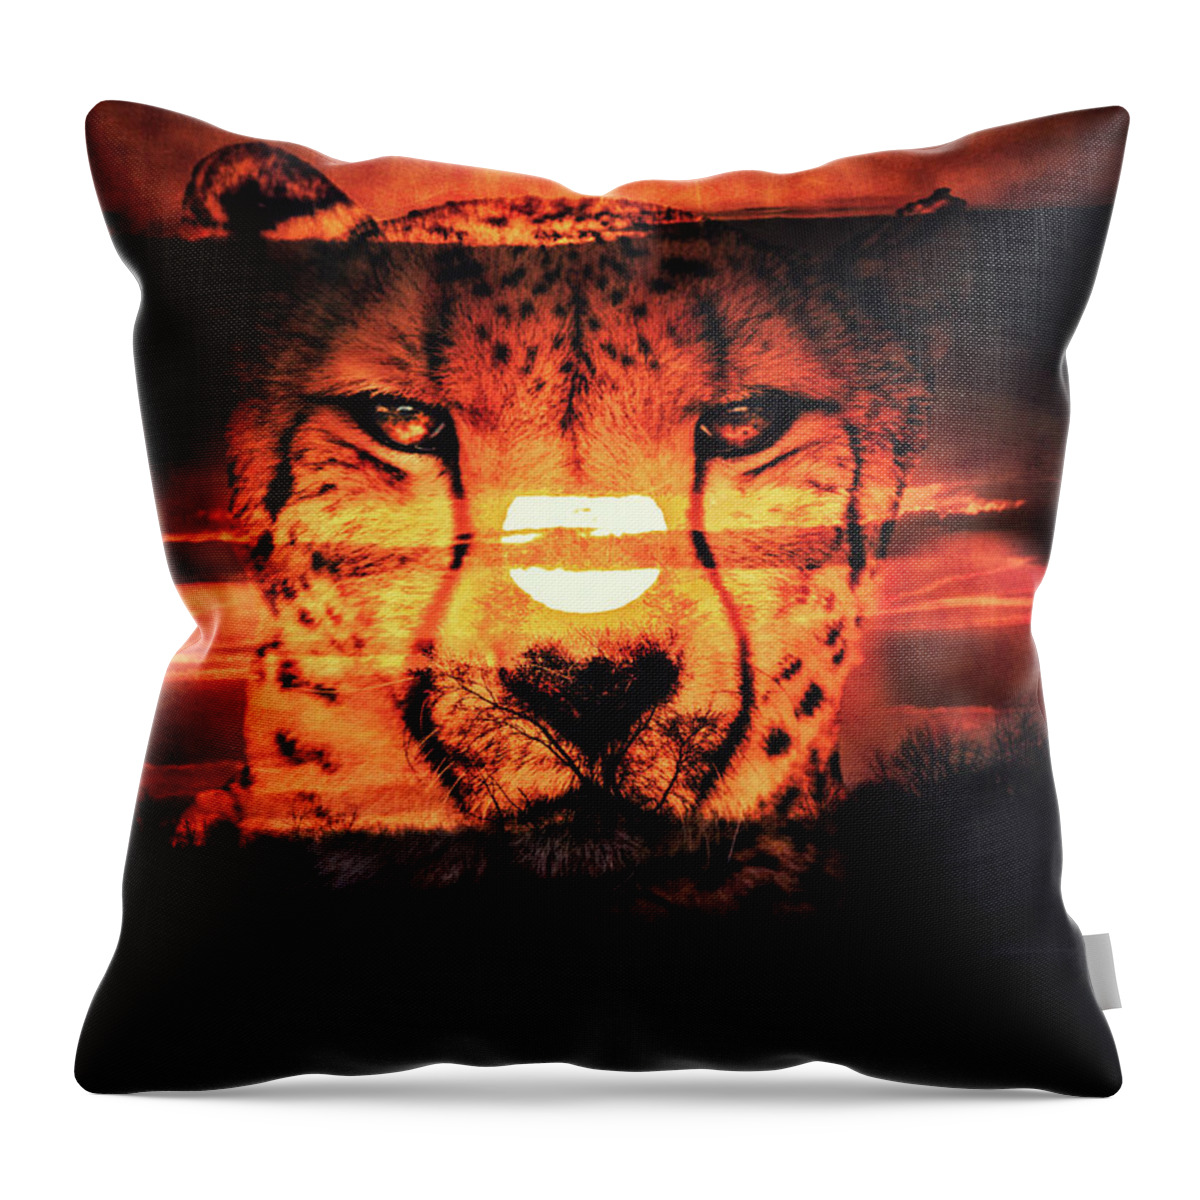 Cheetah Portrait Throw Pillow featuring the photograph Cheetah Sunset by Dan Sproul